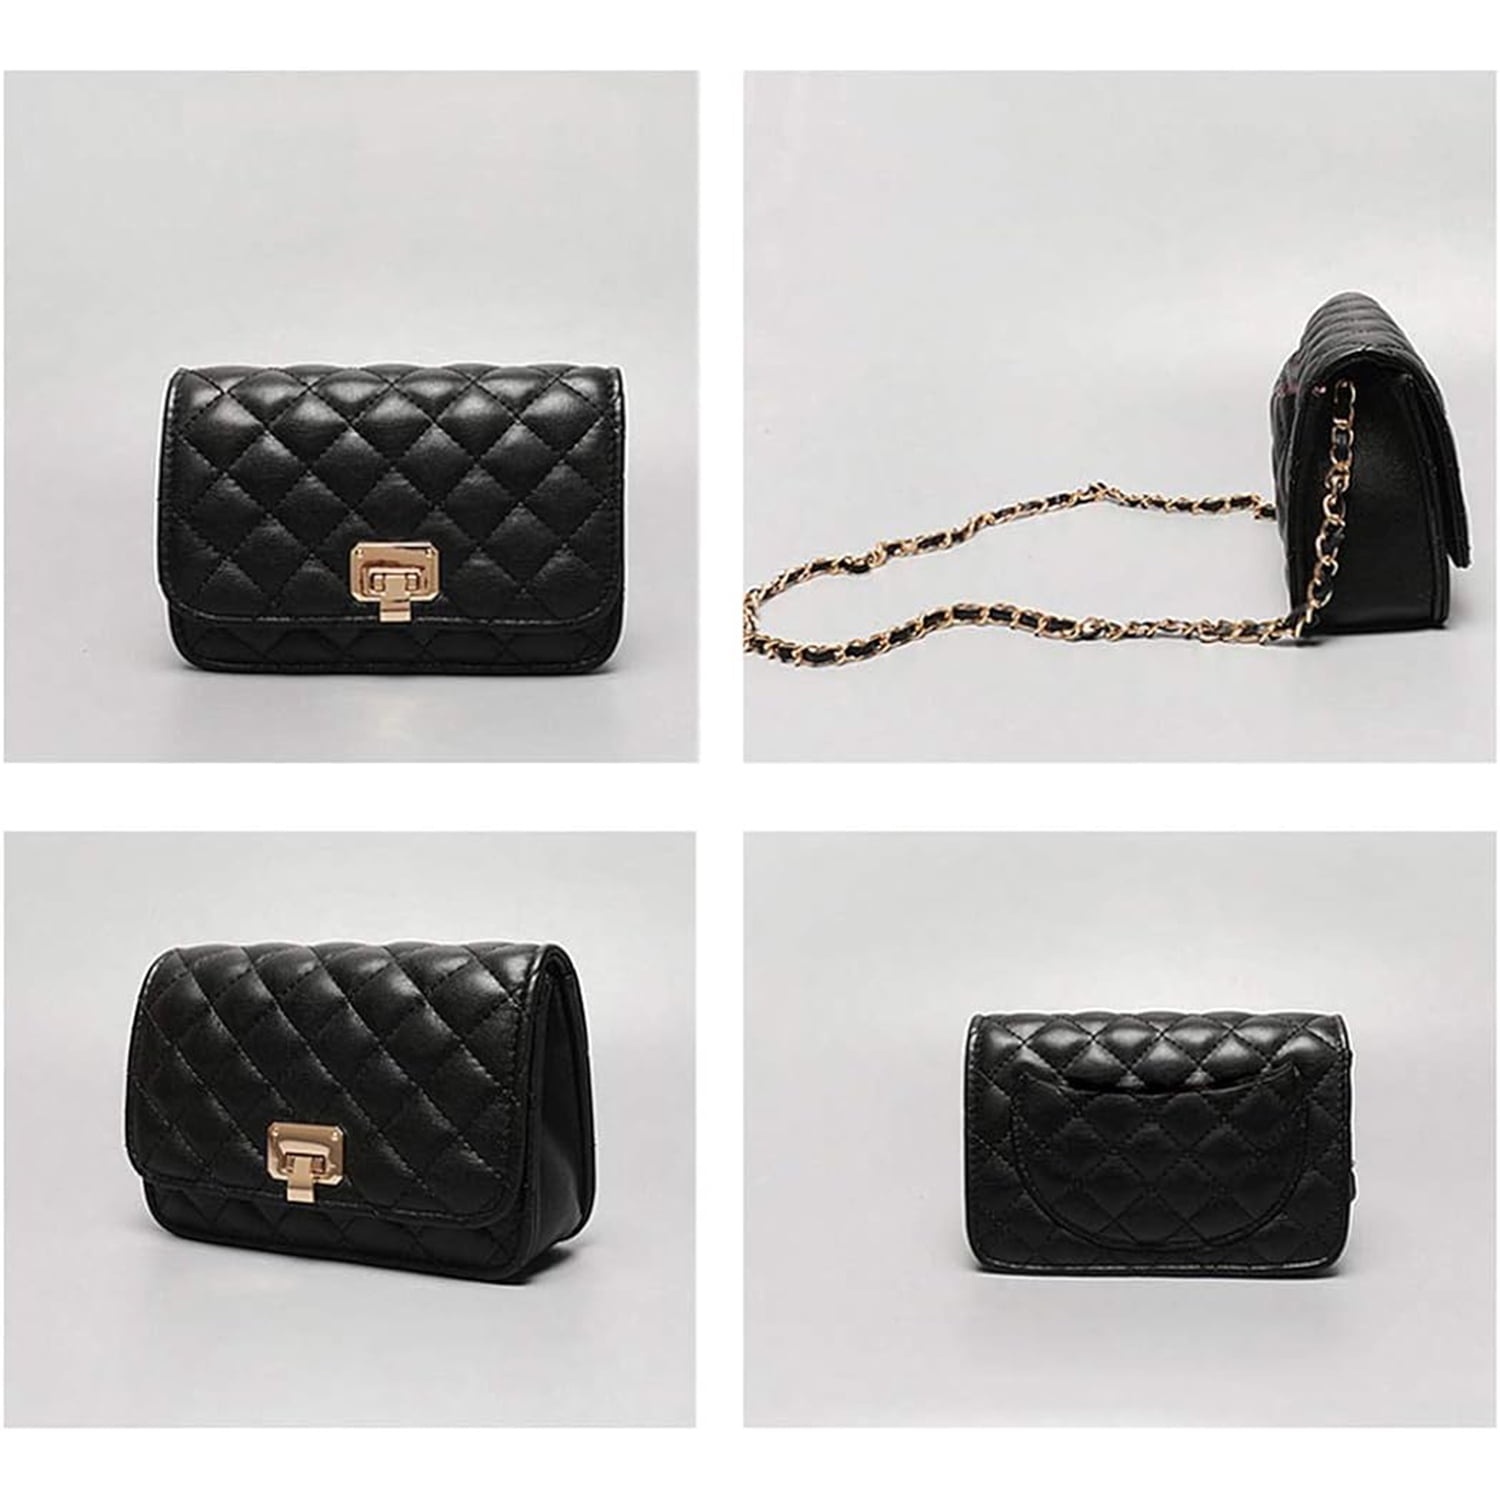 Designer Chain Crossbody Bag 10A LOCKME TENDER Small Leather Shoulder Bag  With Delicate Knockoff Finish 19CM M58554 YL047 From Burberrys2, $292.28 |  DHgate.Com